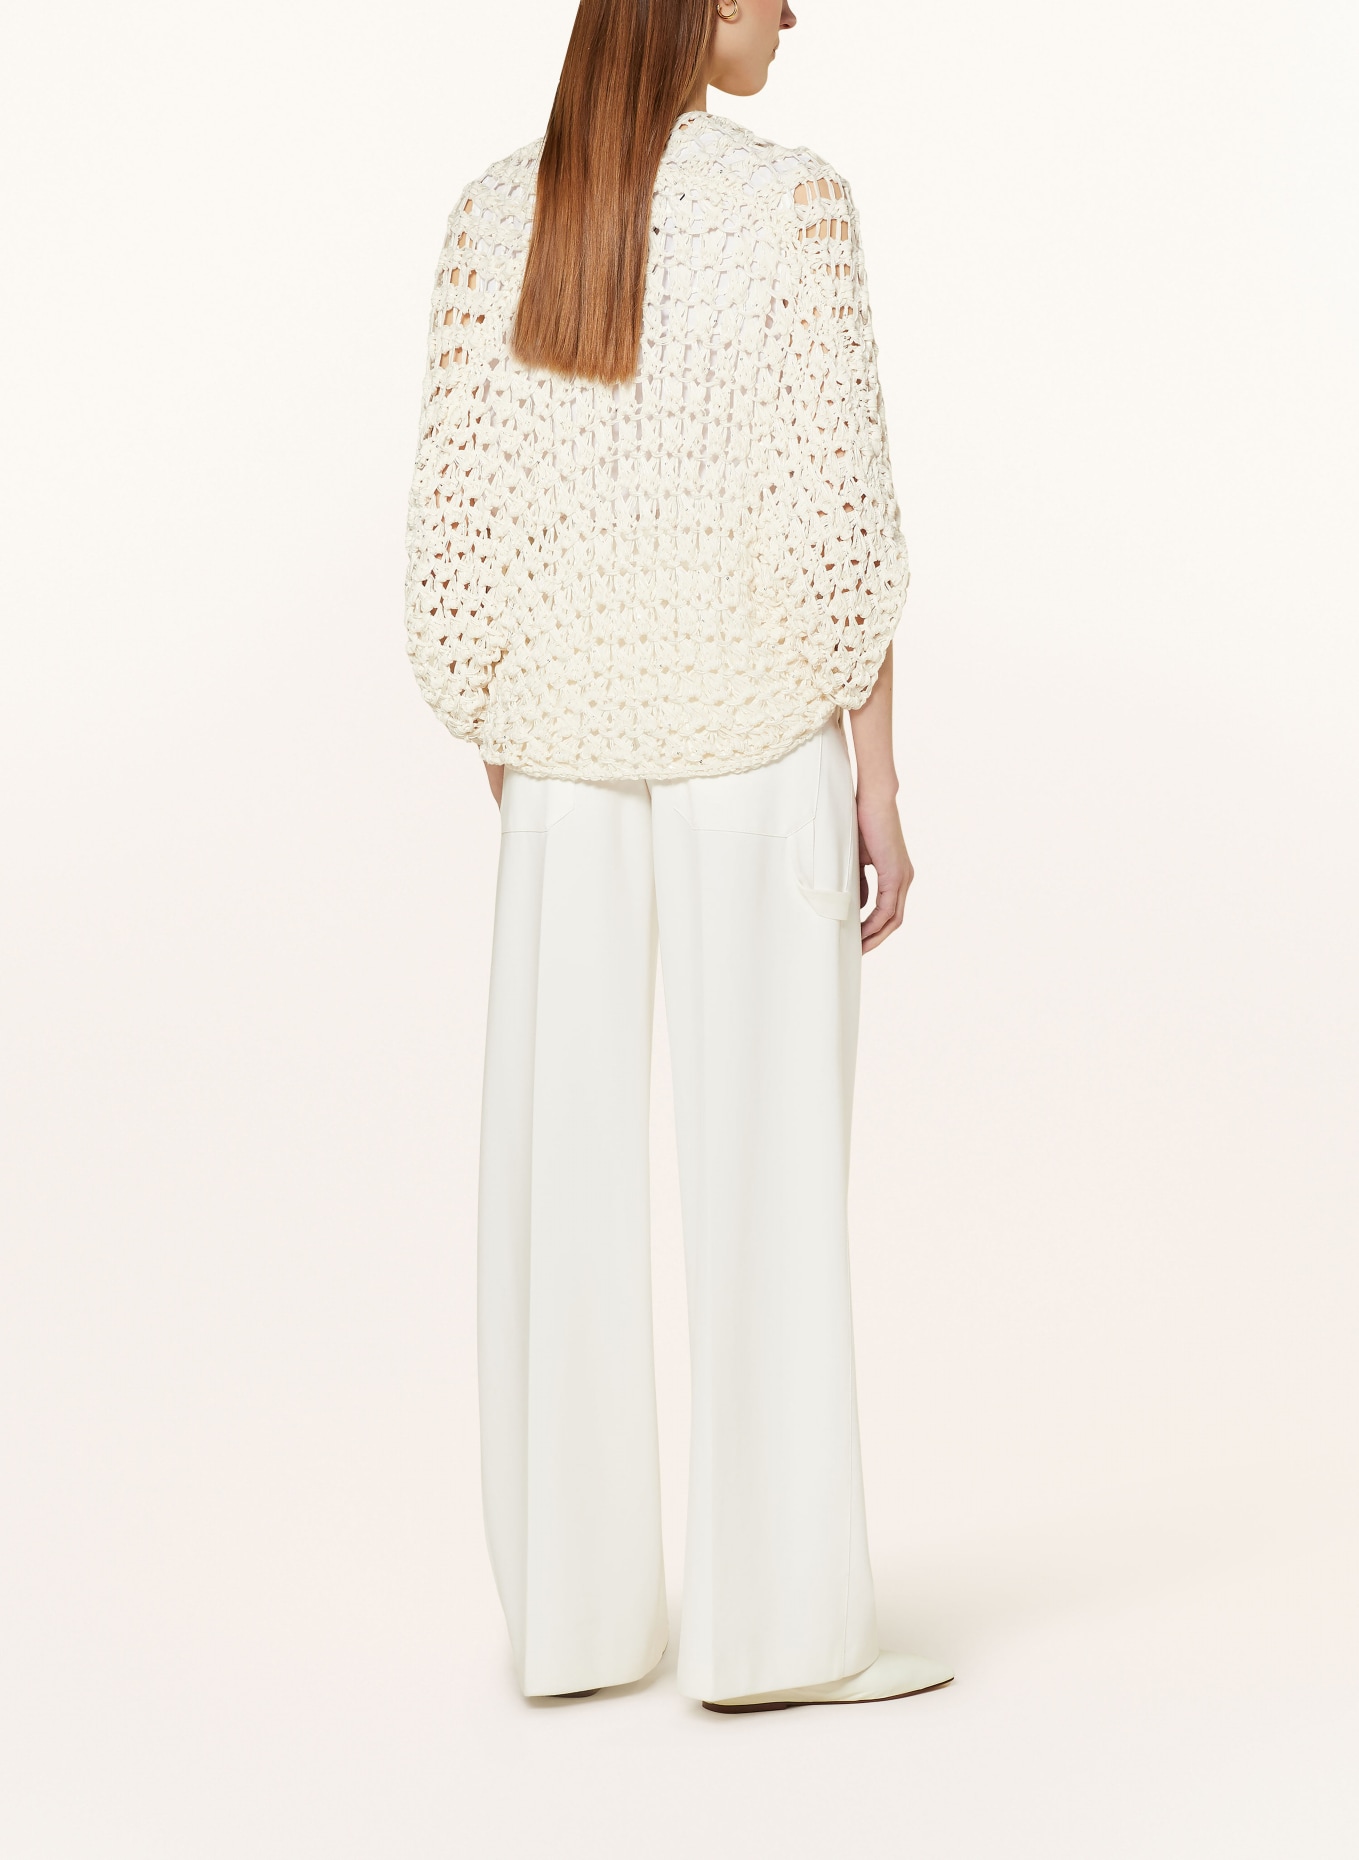 ANTONELLI firenze Knit cardigan PGNATELLO with sequins and 3/4 sleeves, Color: WHITE (Image 3)